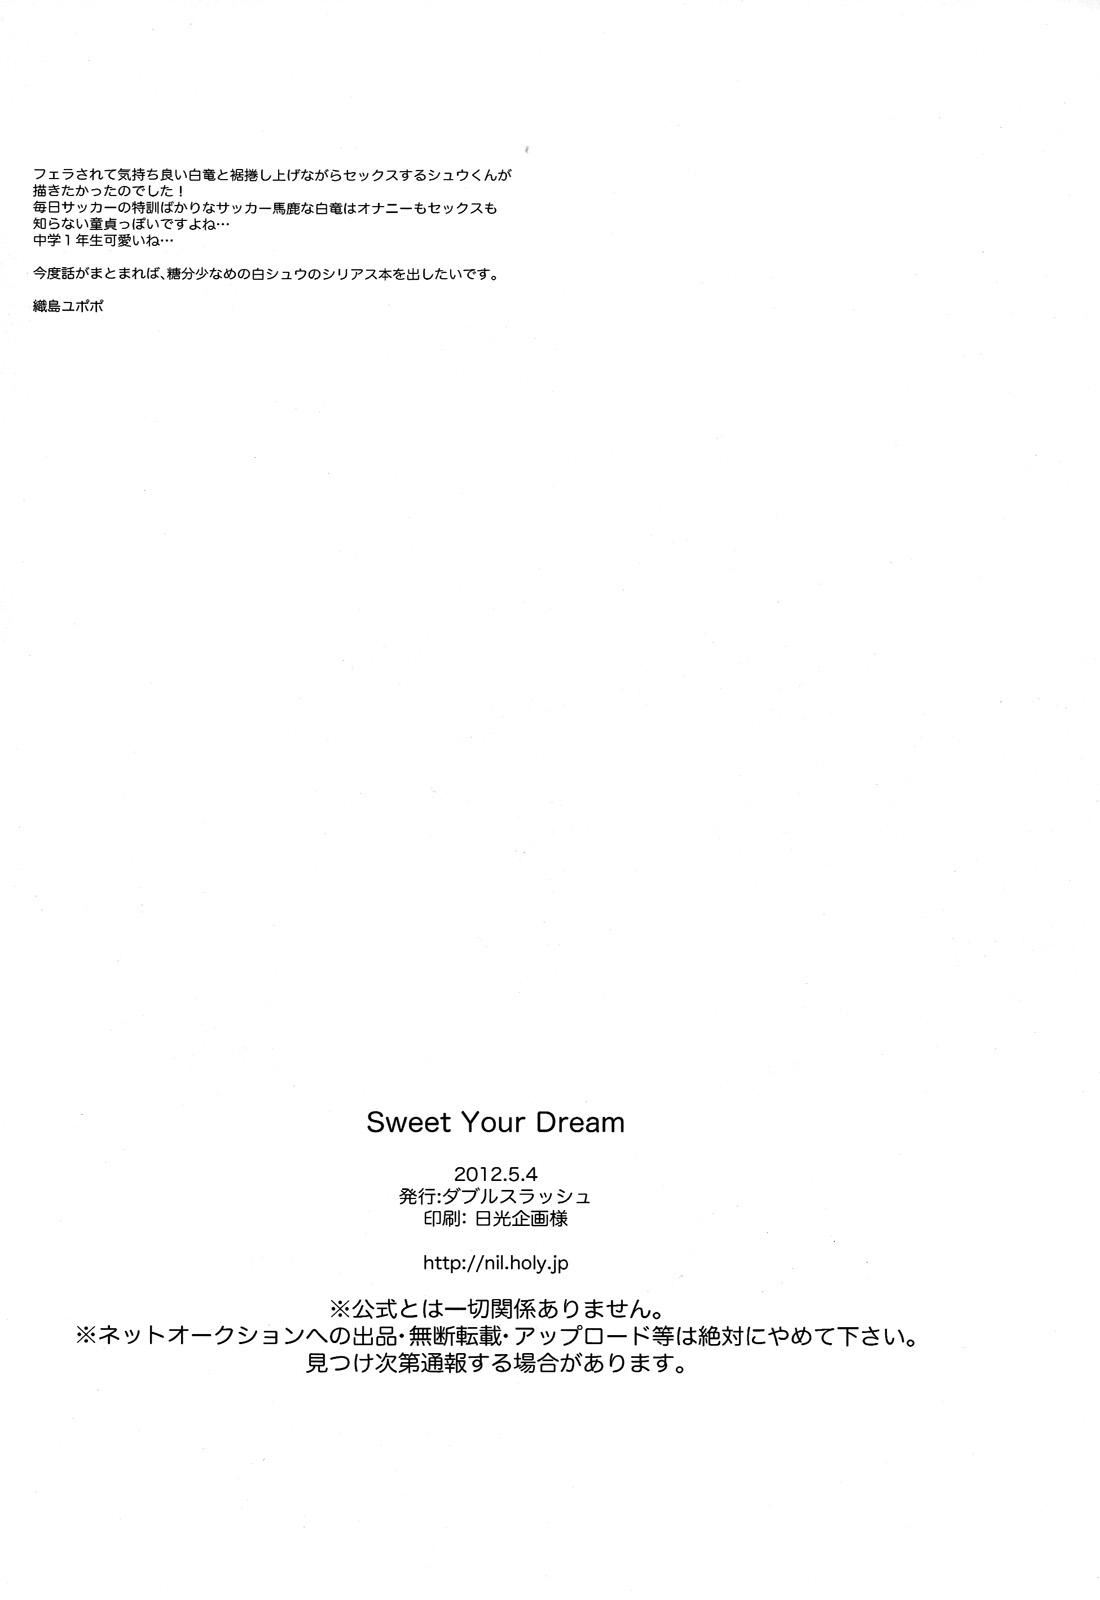 Sweet Your Dream 33